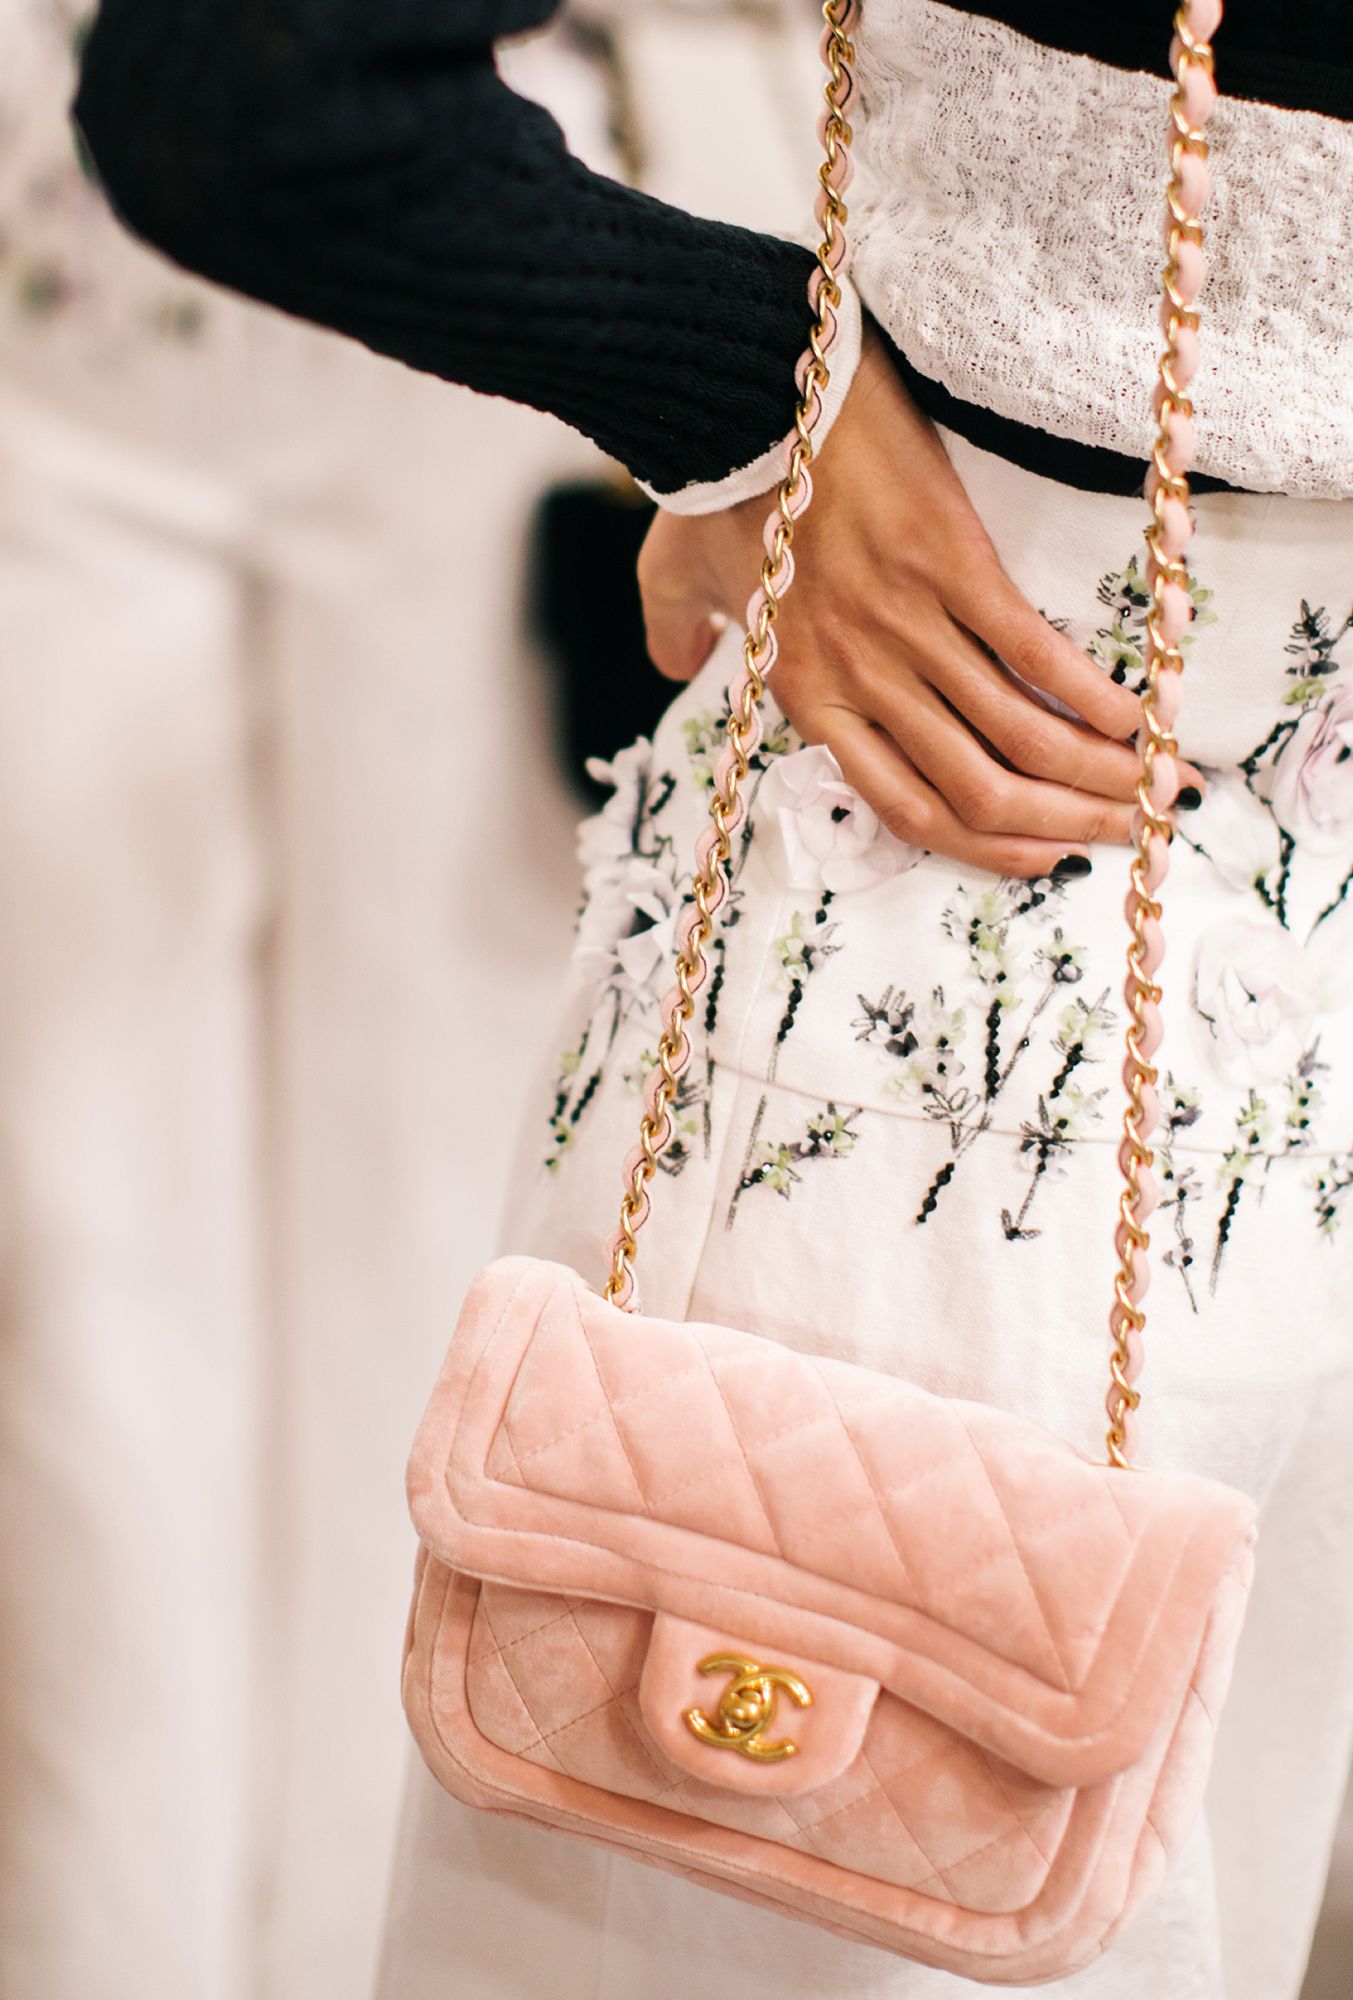 75 Chanel Bags from Spring-Summer 2017 Pre-Collection